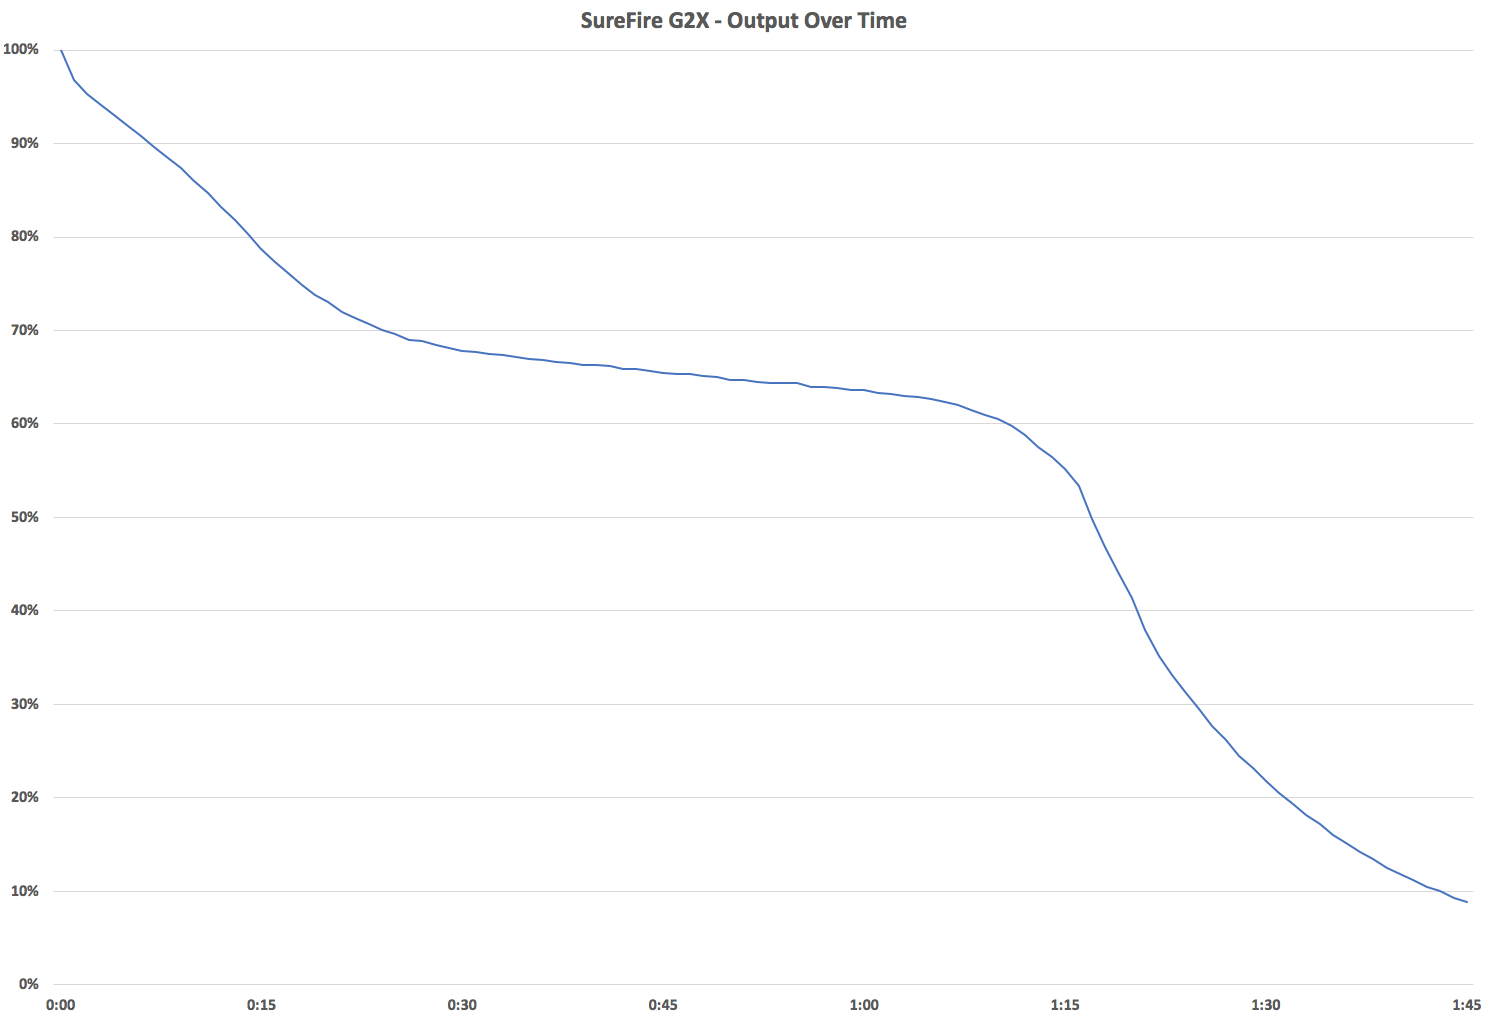 SureFire G2X Output Over Time